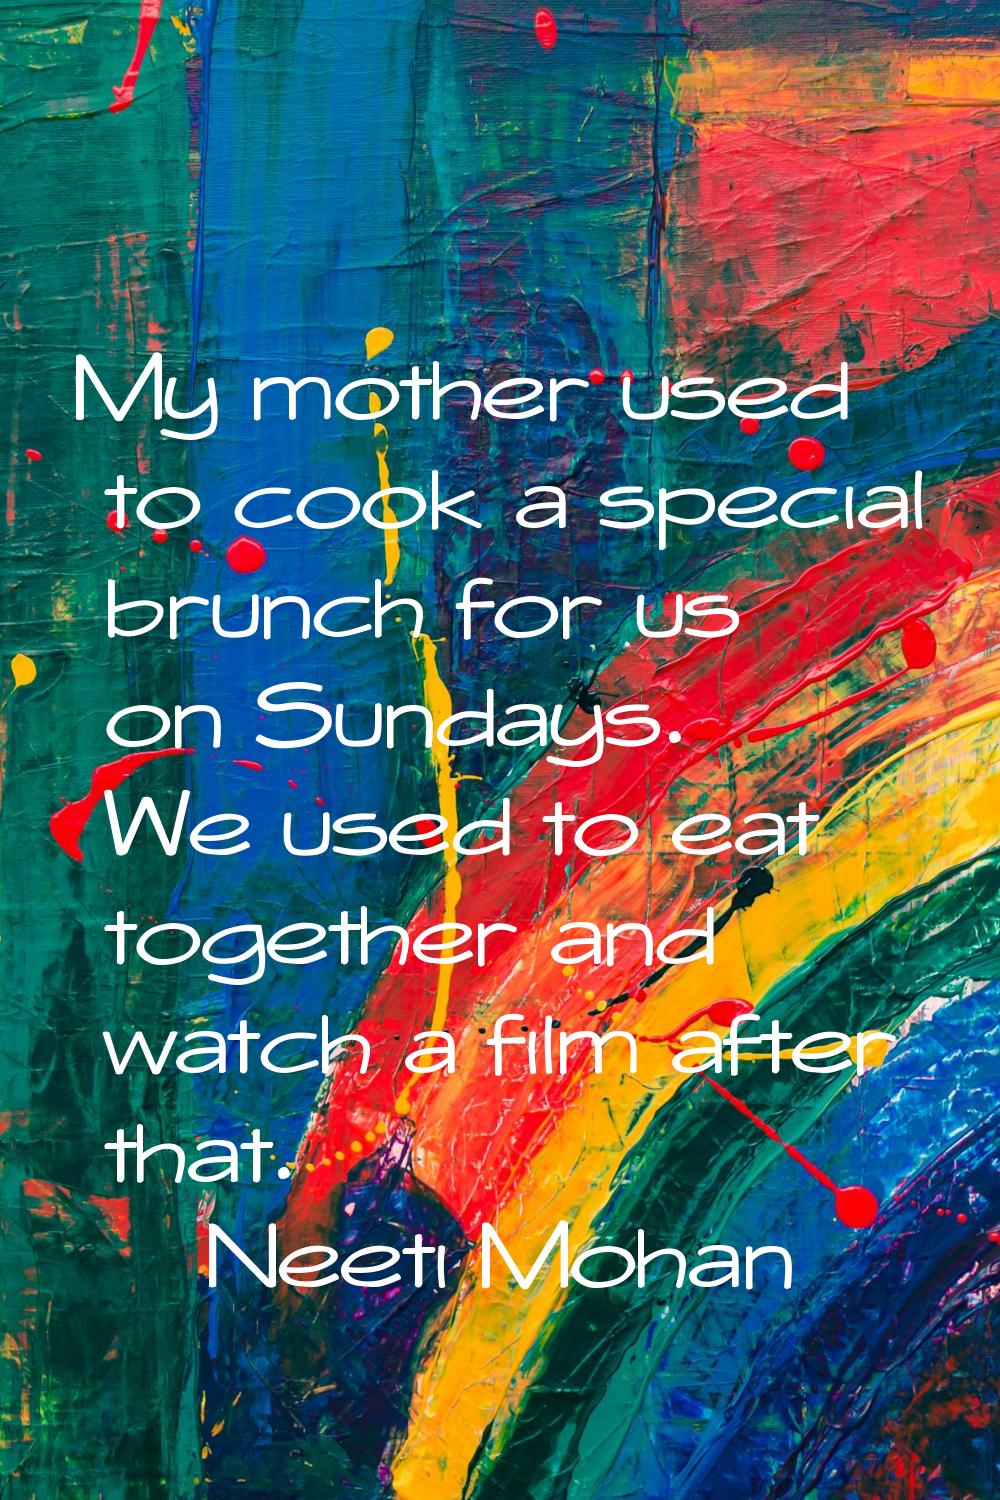 My mother used to cook a special brunch for us on Sundays. We used to eat together and watch a film